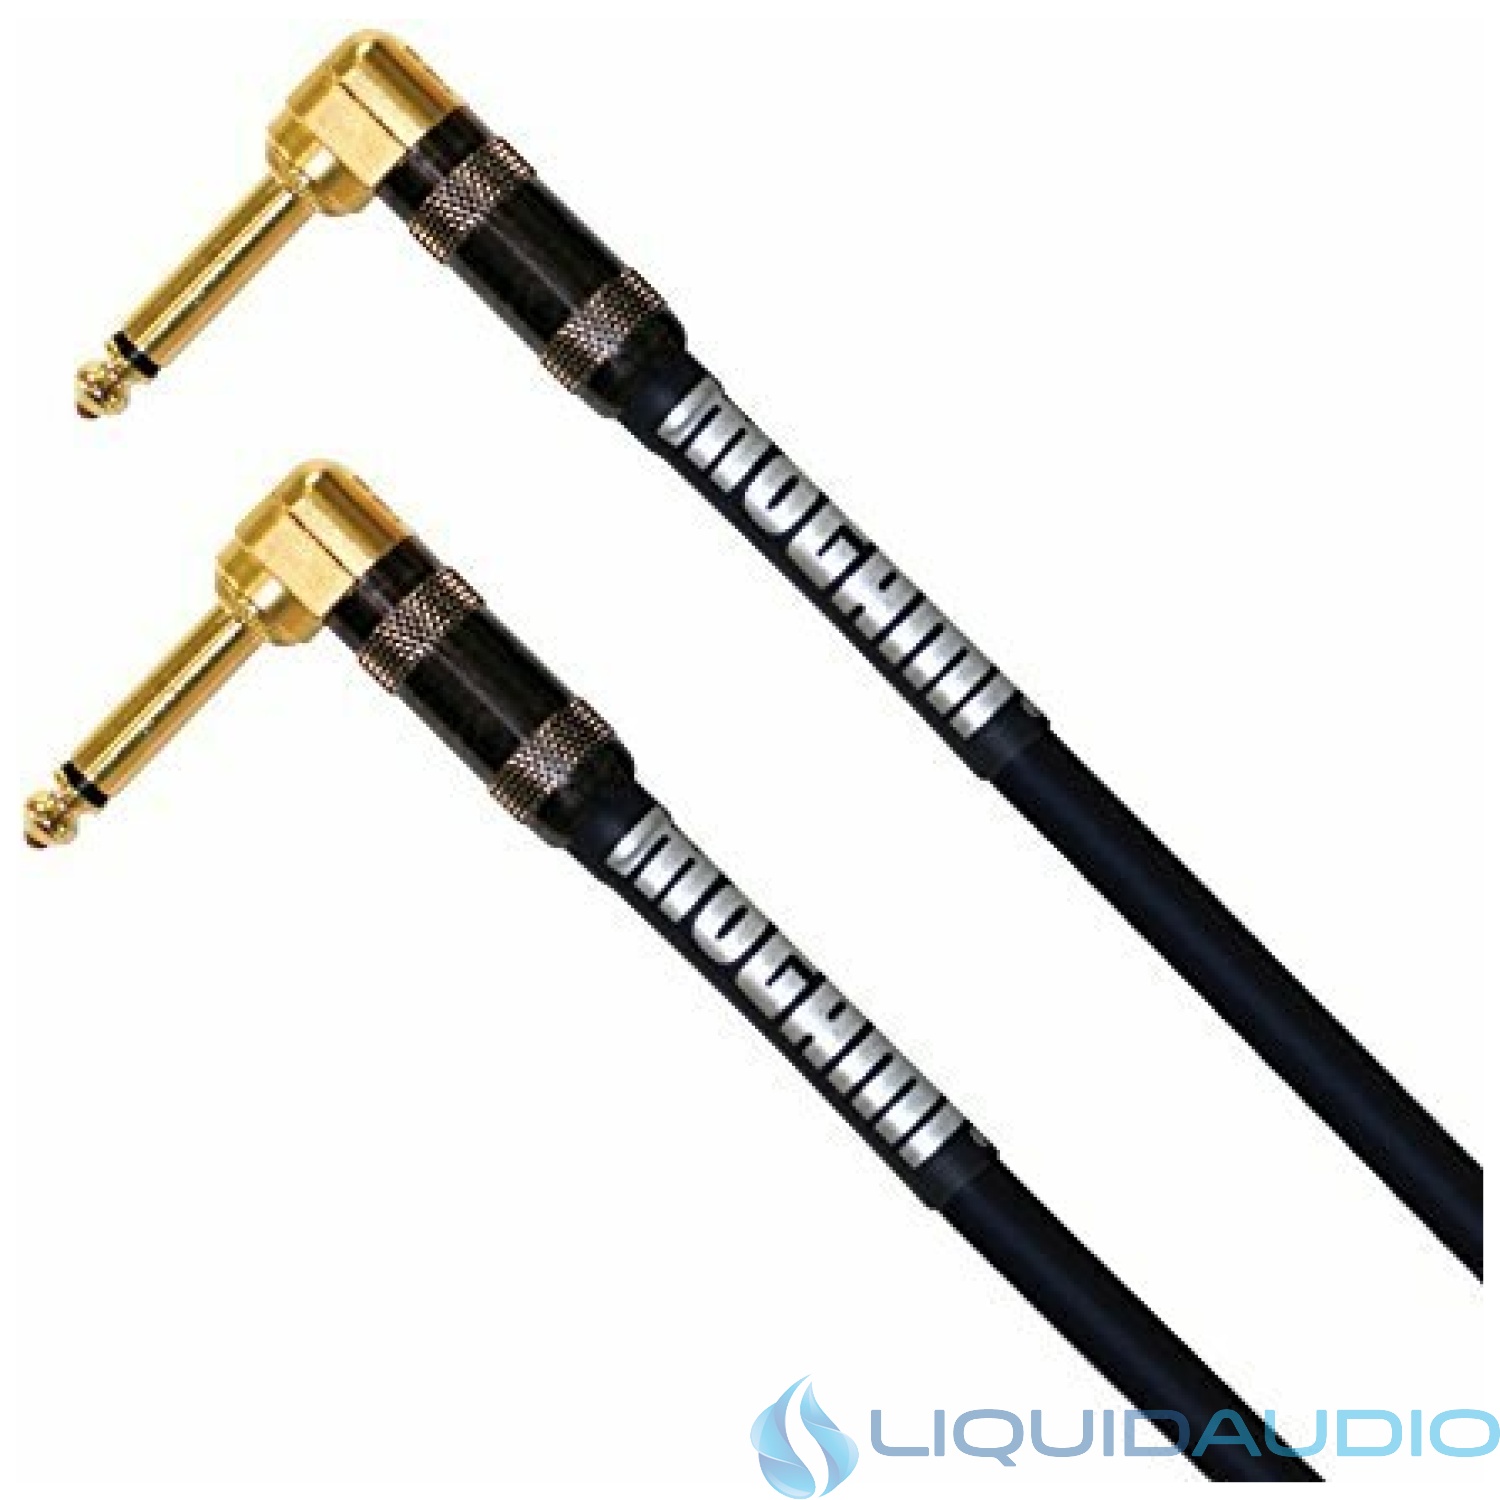 Mogami PLATINUM GUITAR-01RR Pedal Effects Instrument Cable, 1/4" TS Male Plugs, Gold Contacts, Right Angle Connectors, 11 Inch